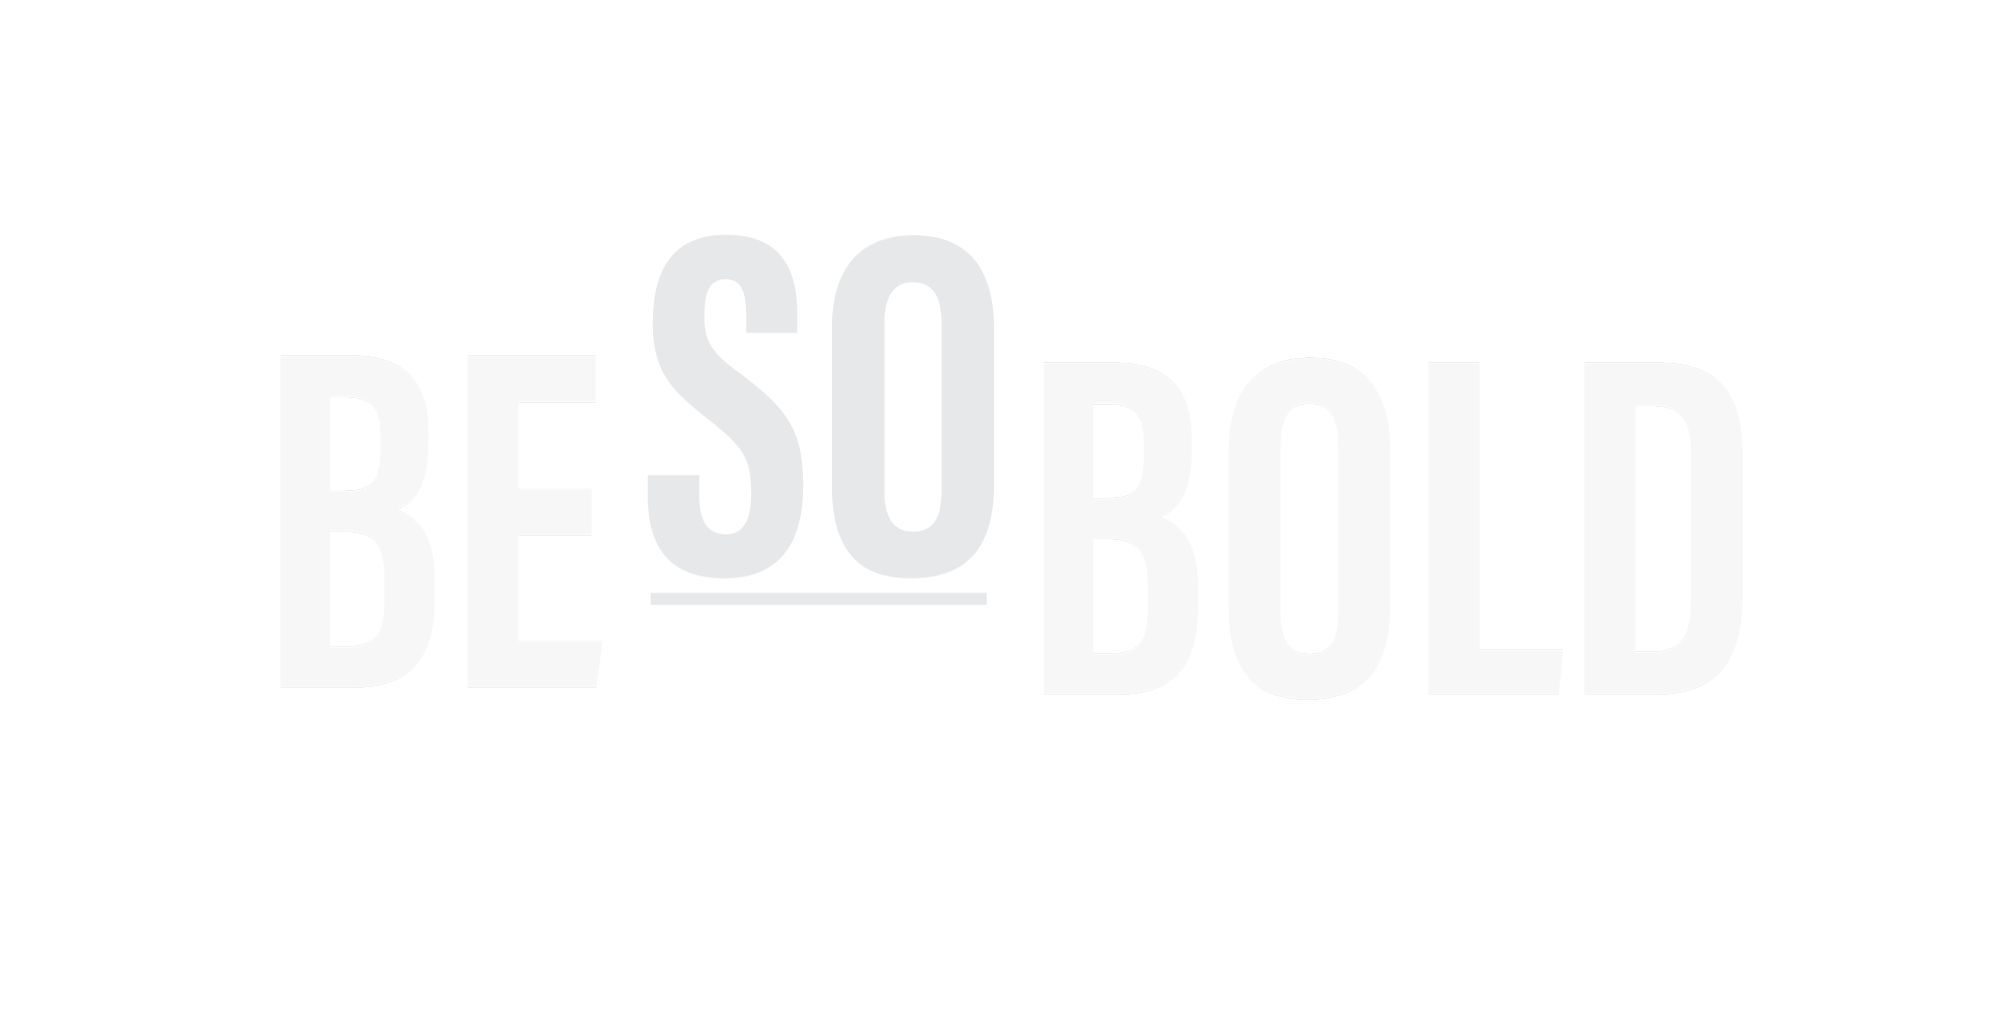 Be So Bold Total Dish Branding and Messaging